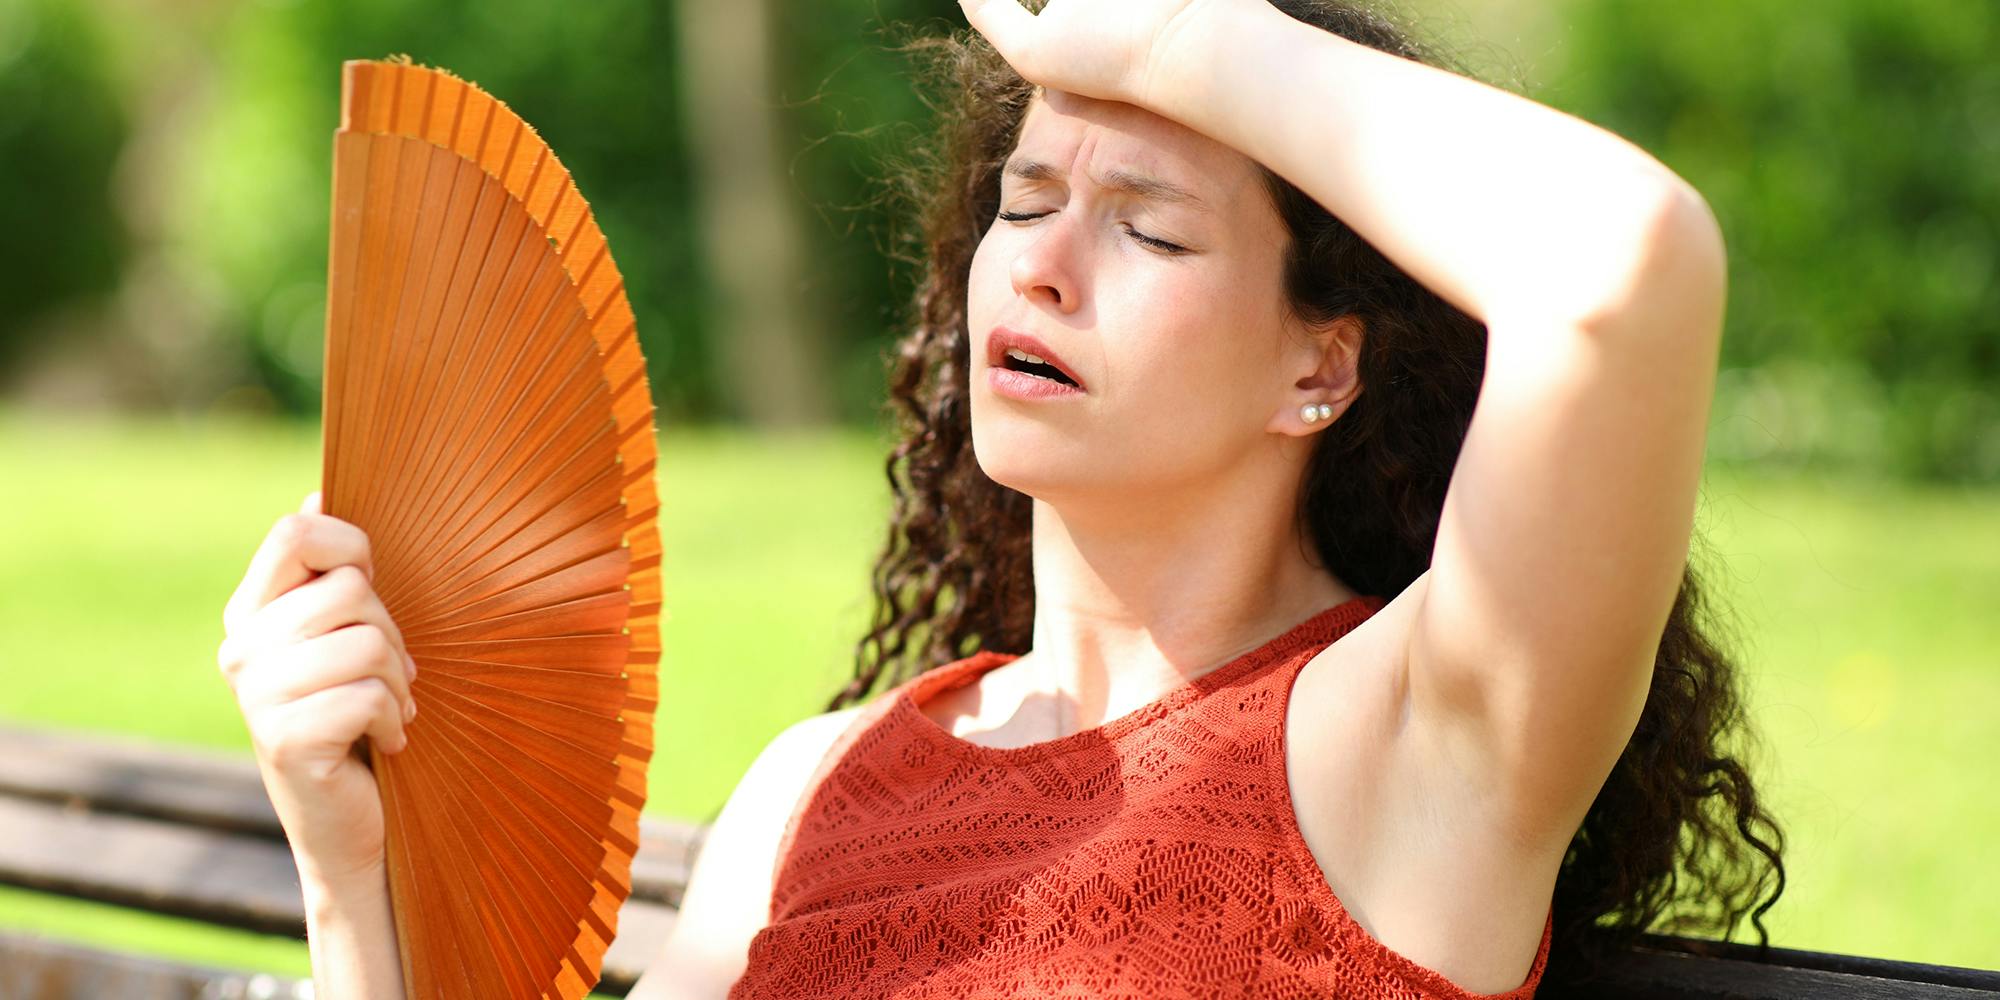 Woman fanning herself to illustrate sweating memes story